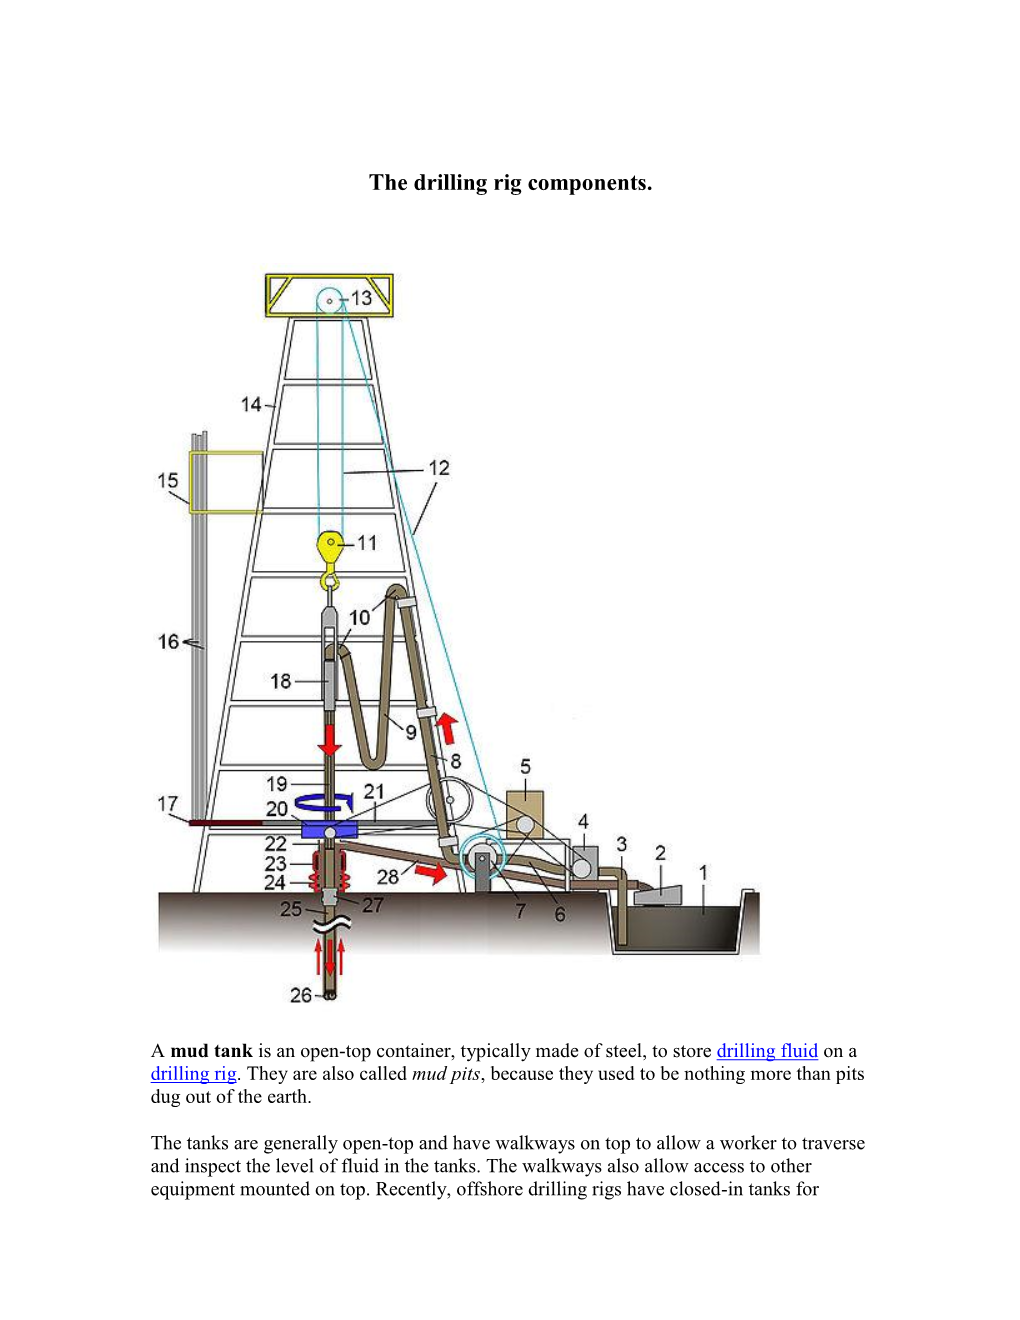 The Drilling Rig Components